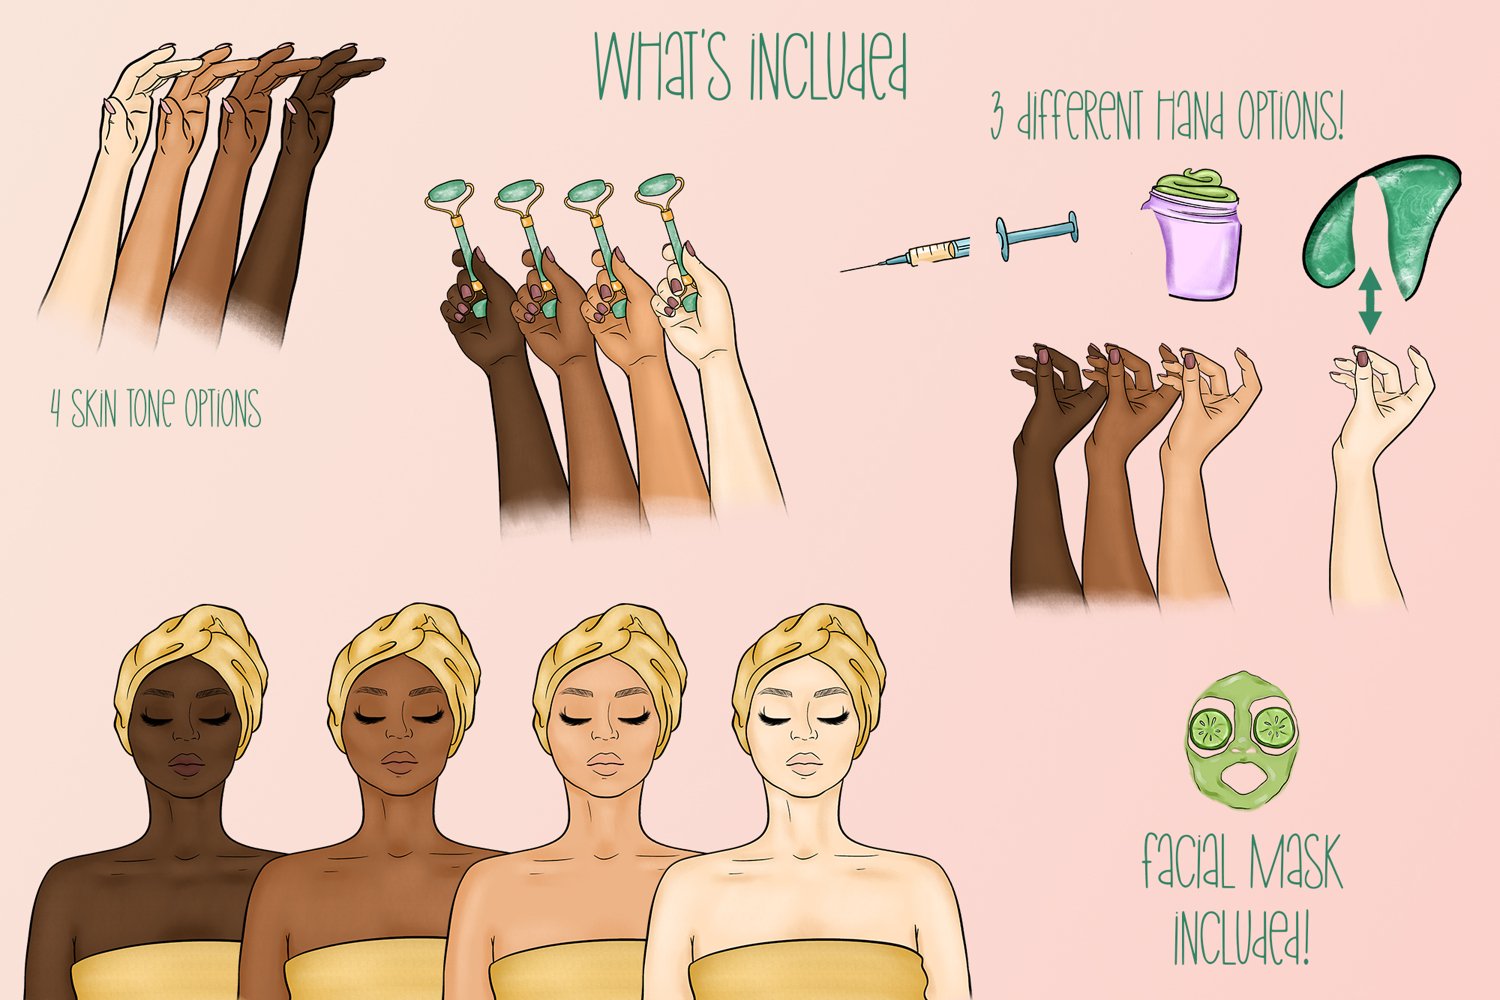 There are so many colorful Esthetician & Beauty illustrations.